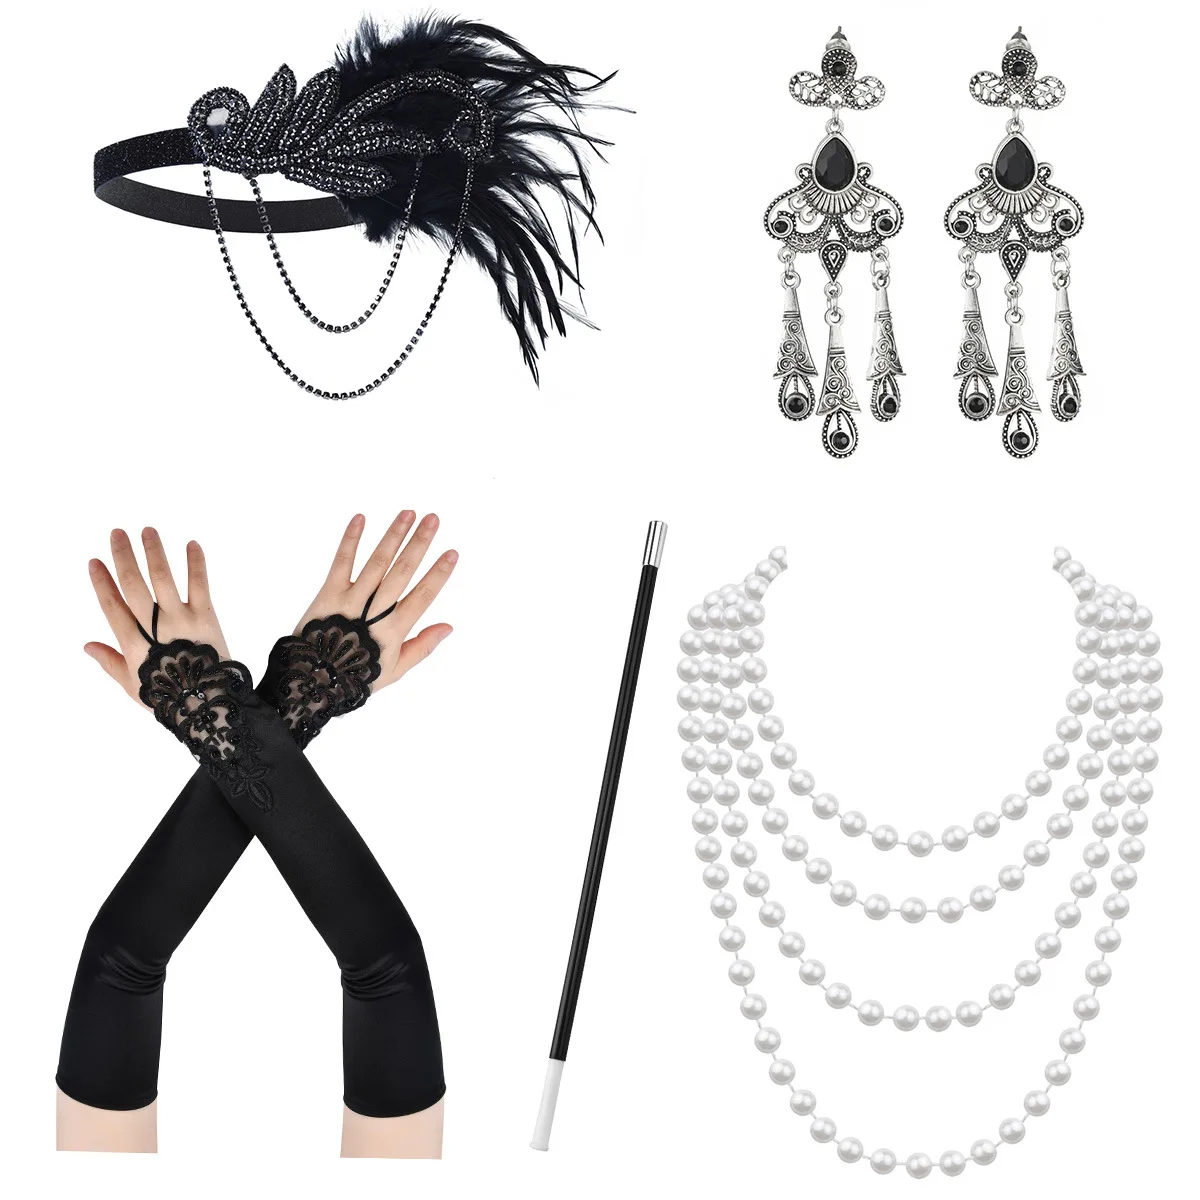 5PCS 1920s Flapper Dress Accessories Retro Party Props GATSBY CHARLESTON Headband Pearl Necklace Feather Band for Wedding